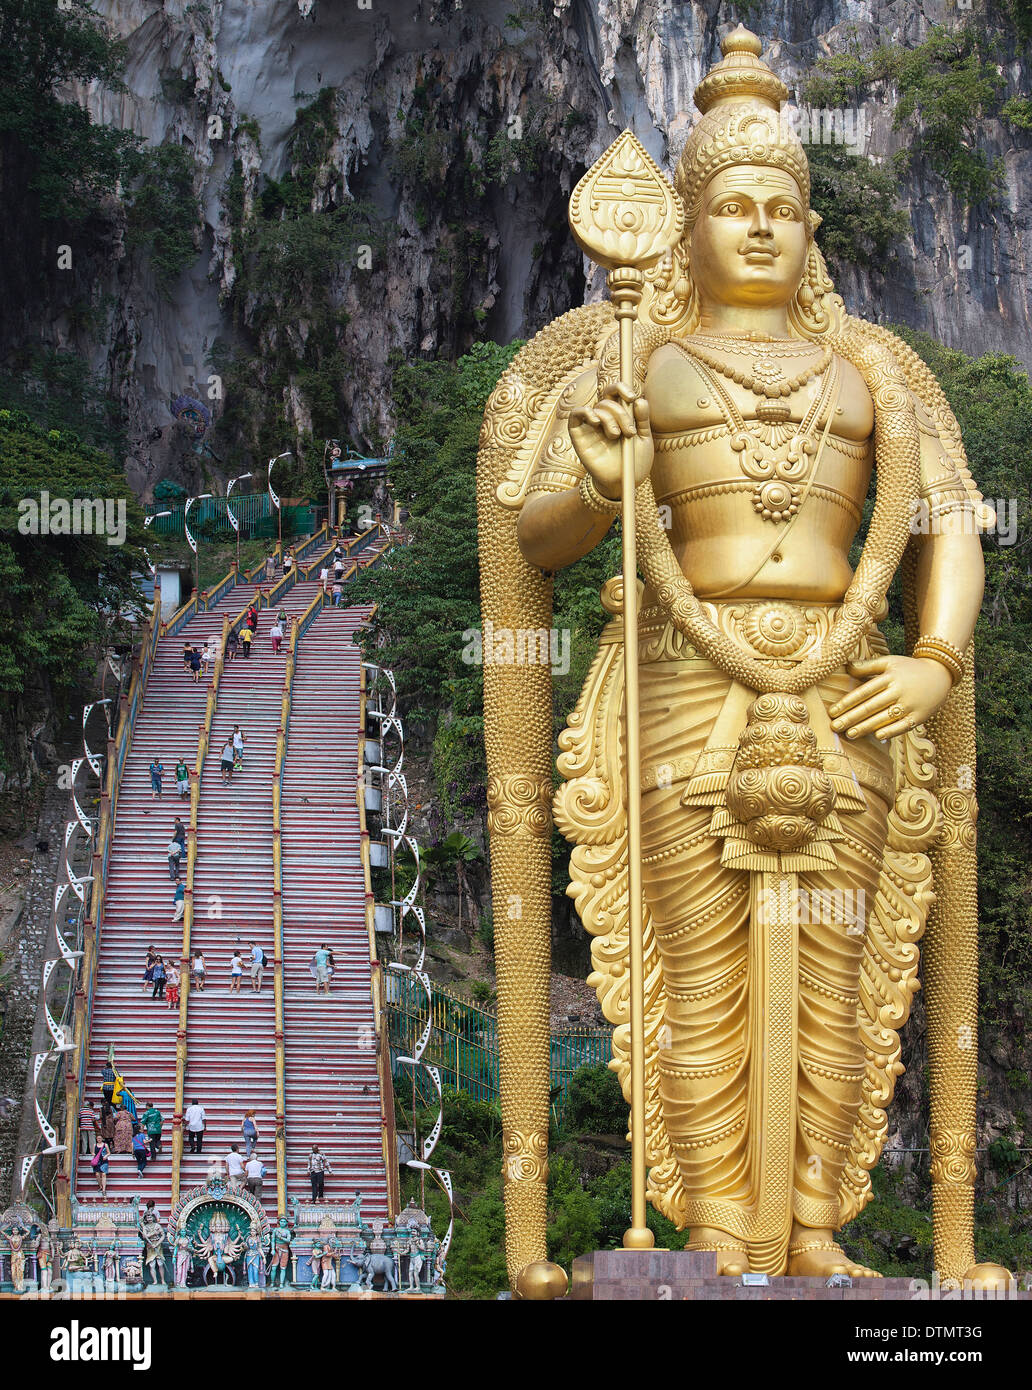 Lord Murugan Hindu God Deity Stature in Indian Temple Entrance at ...